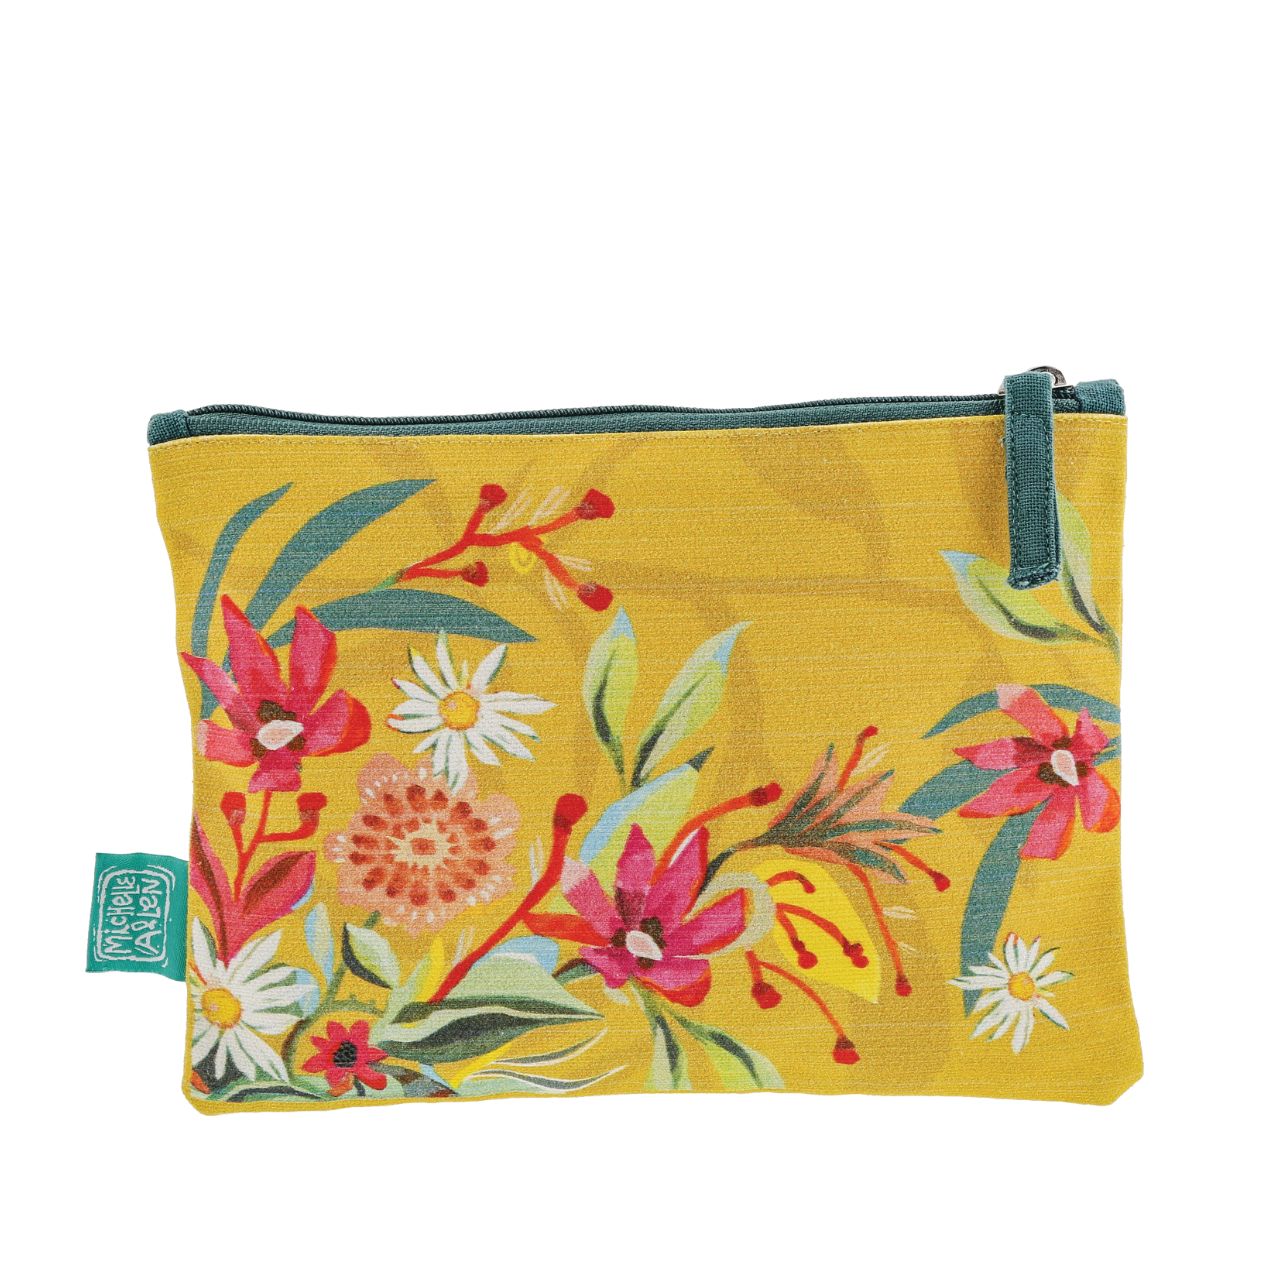 Michelle Allen Cup of Tea Zipped Pouch Medium  These beautiful zippered 100% Cotton pouches are perfect for pencils/pens, trinkets, charging cords, make up or pretty much anything you can possibly think of. Exclusively designed by Michelle Allen.